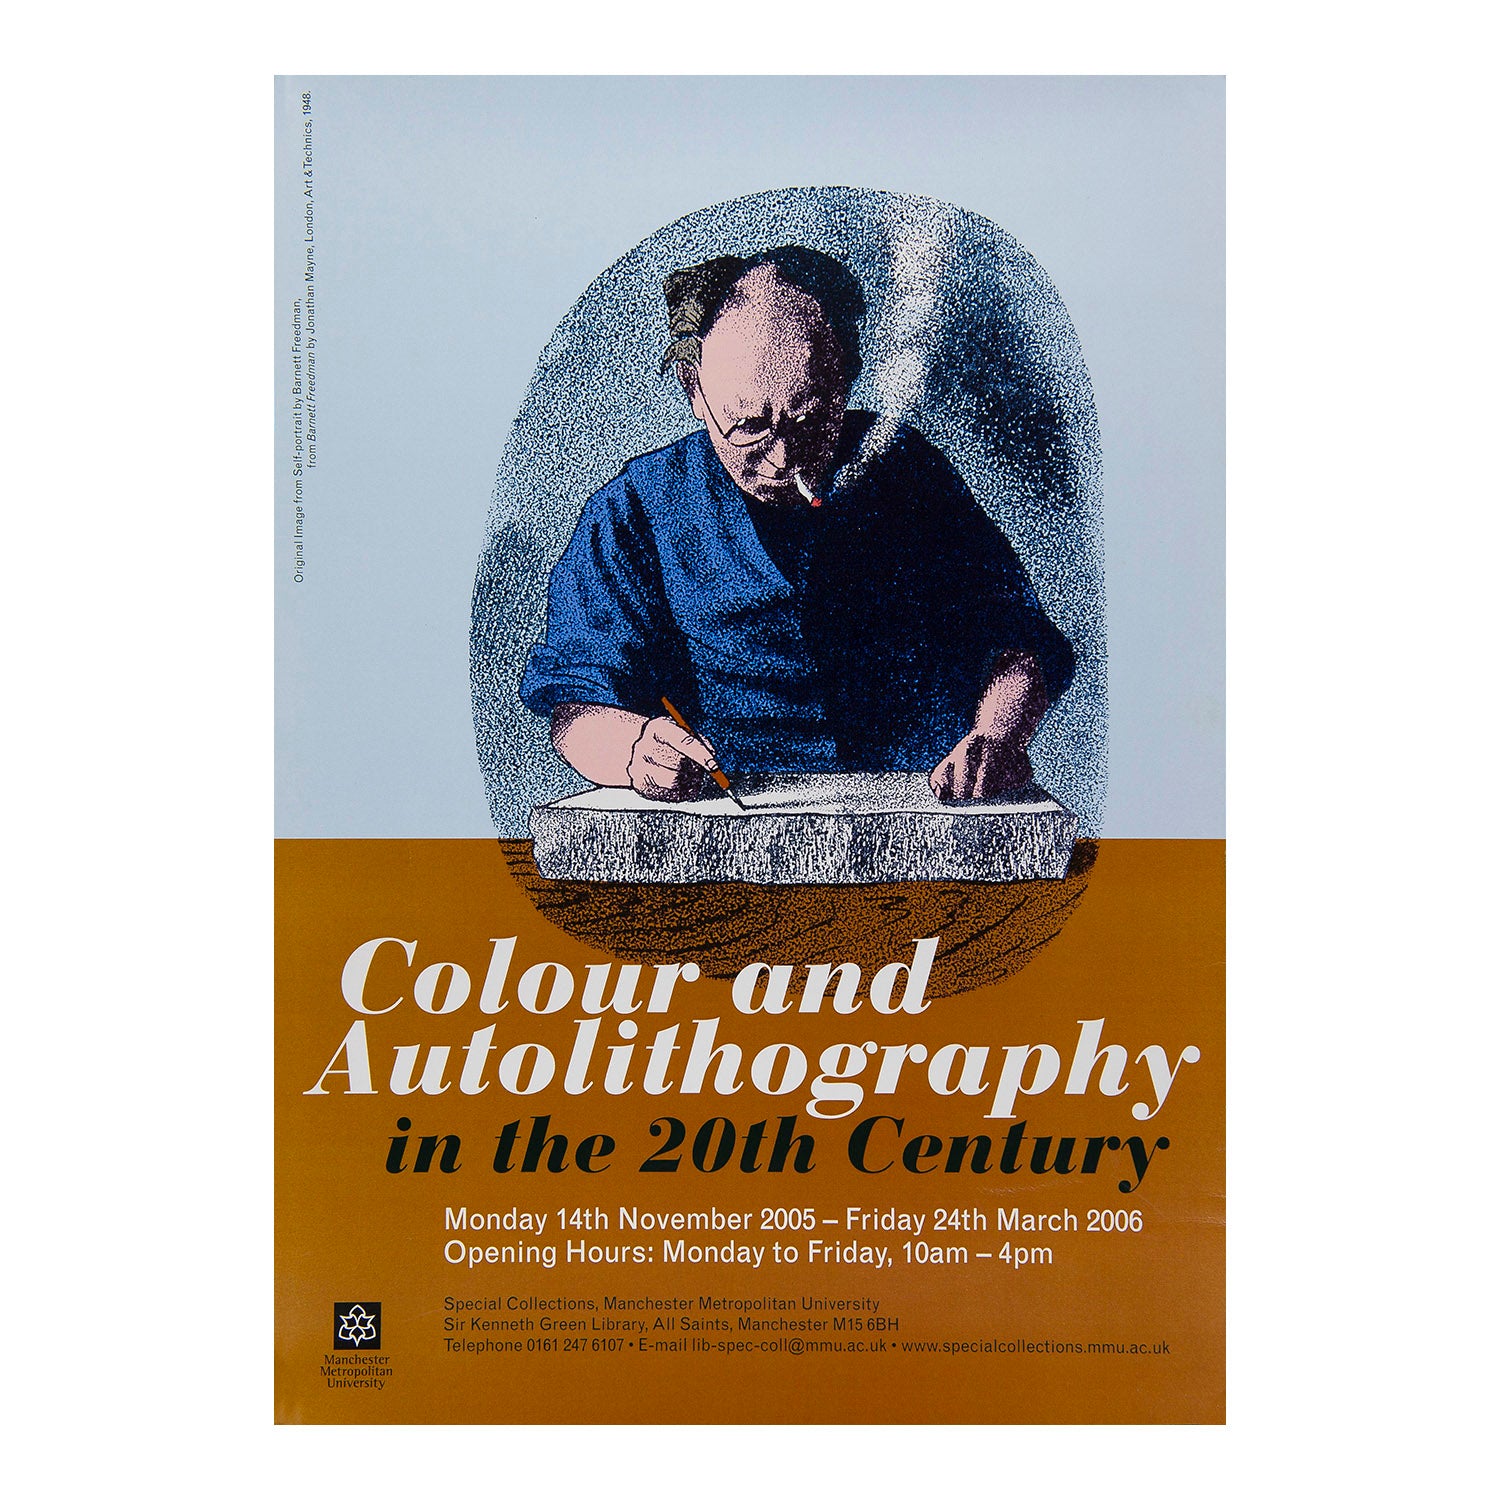 Colour and Autolithography in the 20th Century